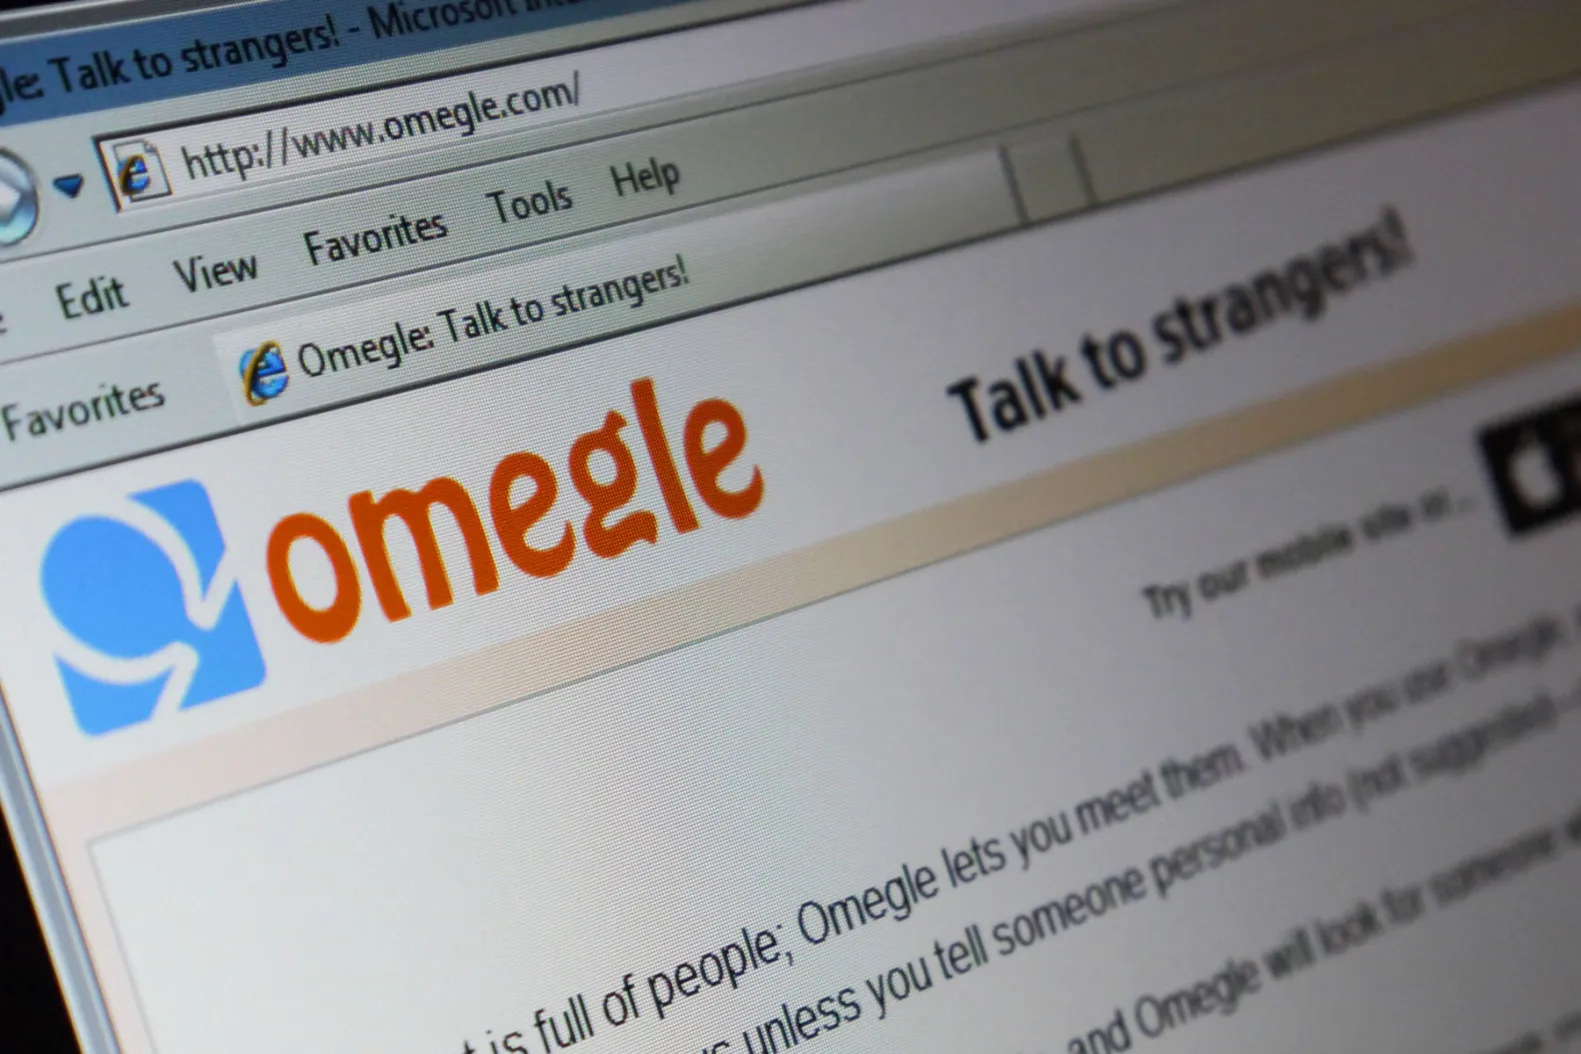 Video chatting site Omegle shut down due to lawsuit file